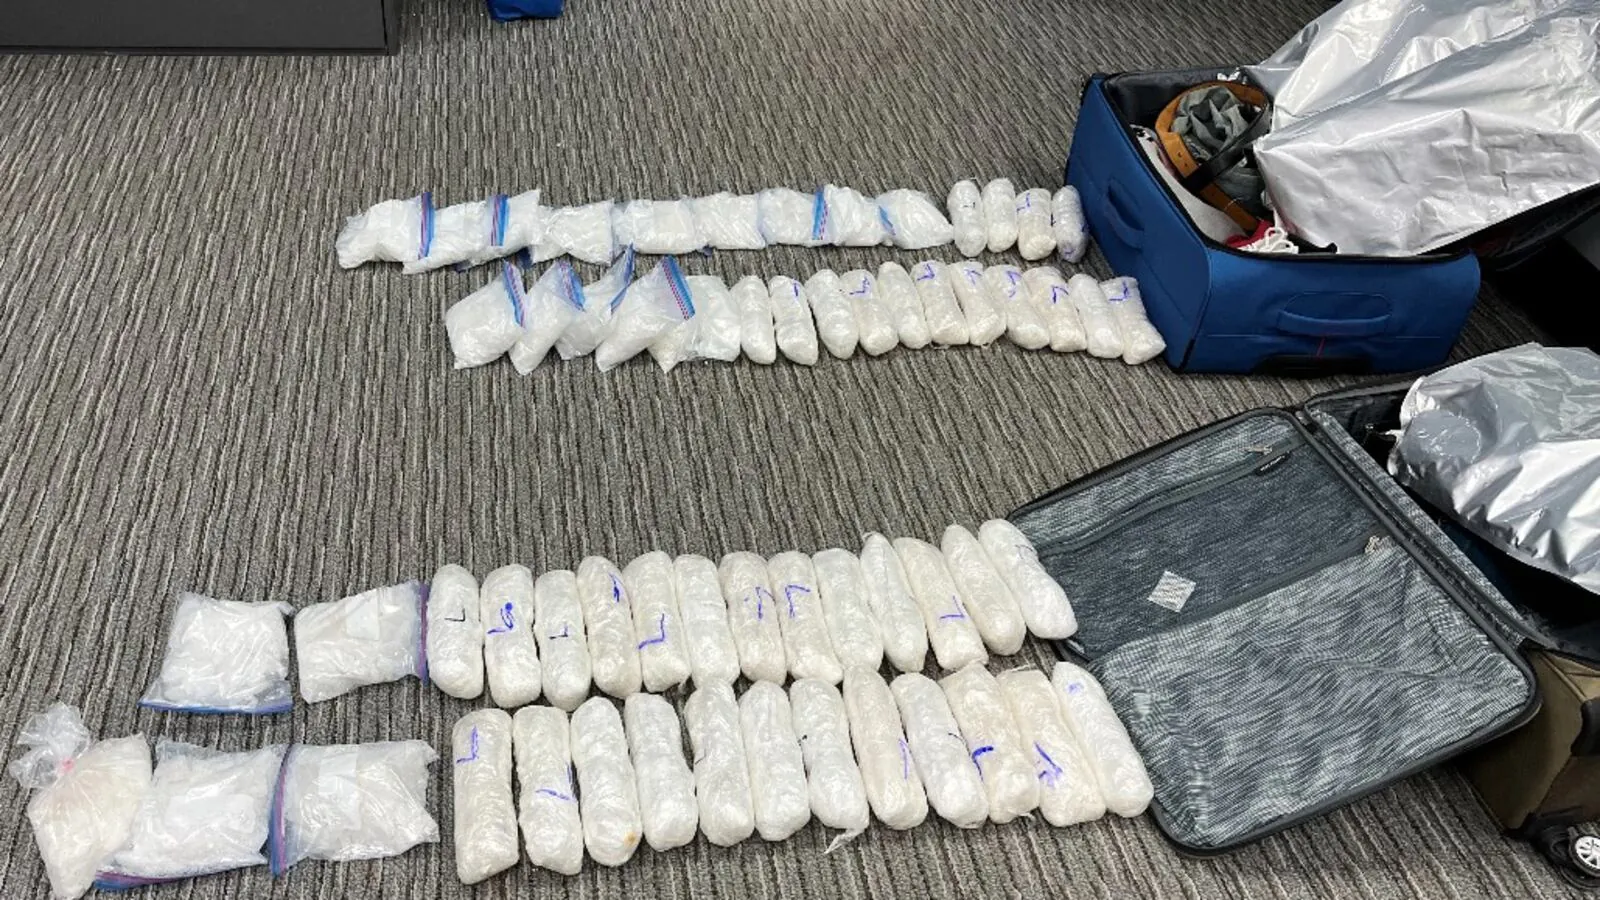 Charges filed after suitcase filled with drugs found at Kansas City bus station